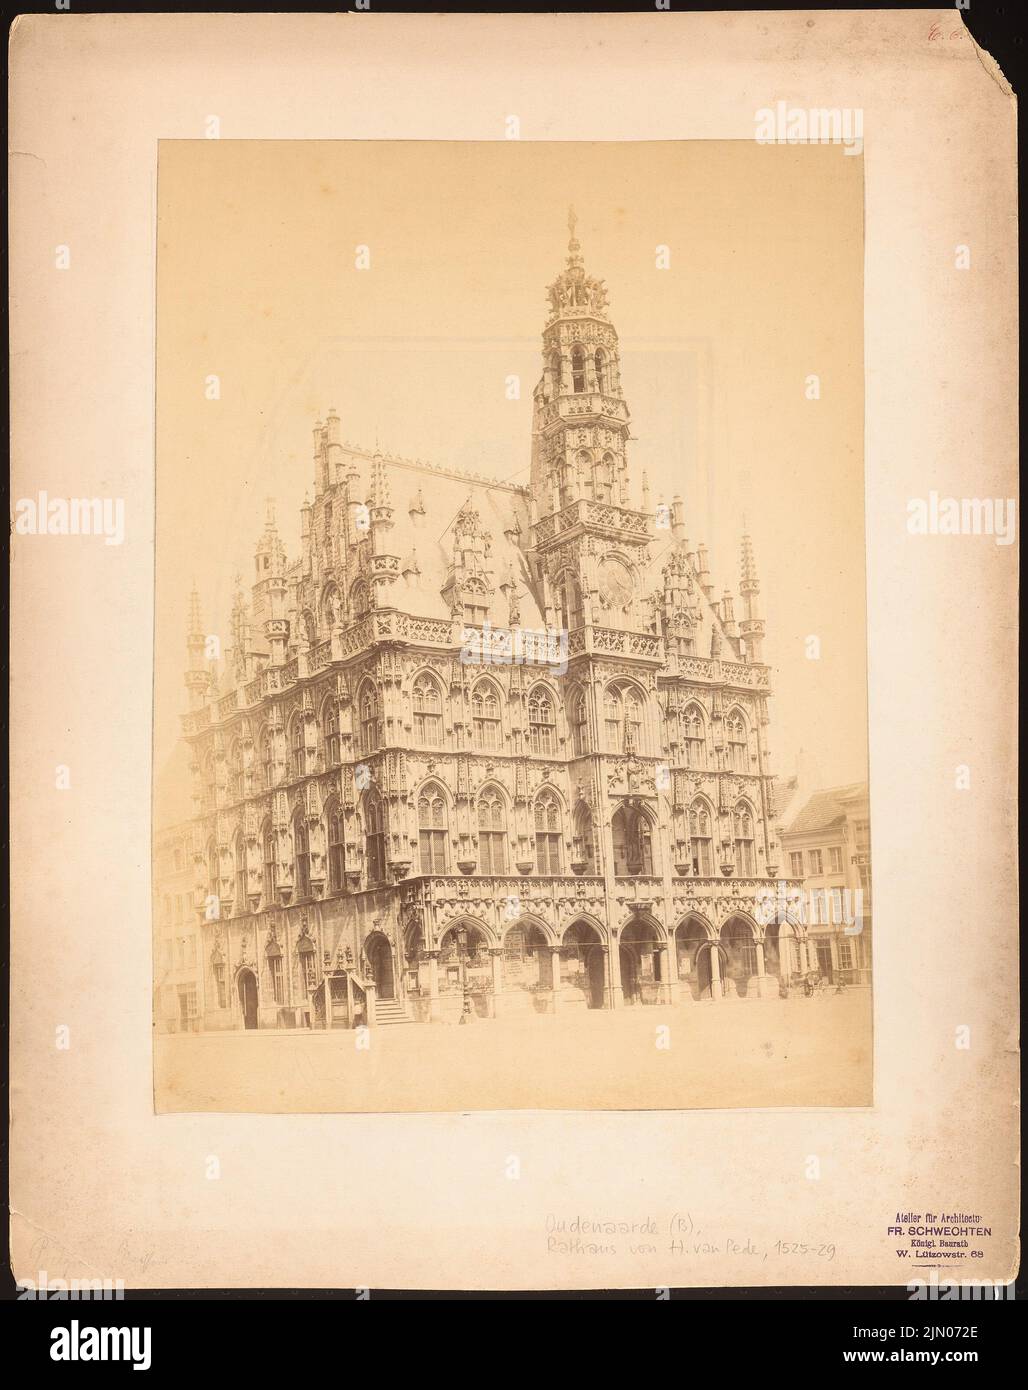 Unknown photographer, town hall in Oudenaarde (without dat.): View. Photo on cardboard, 52.7 x 41.7 cm (including scan edges) N.N. : Rathaus, Oudenaarde Stock Photo